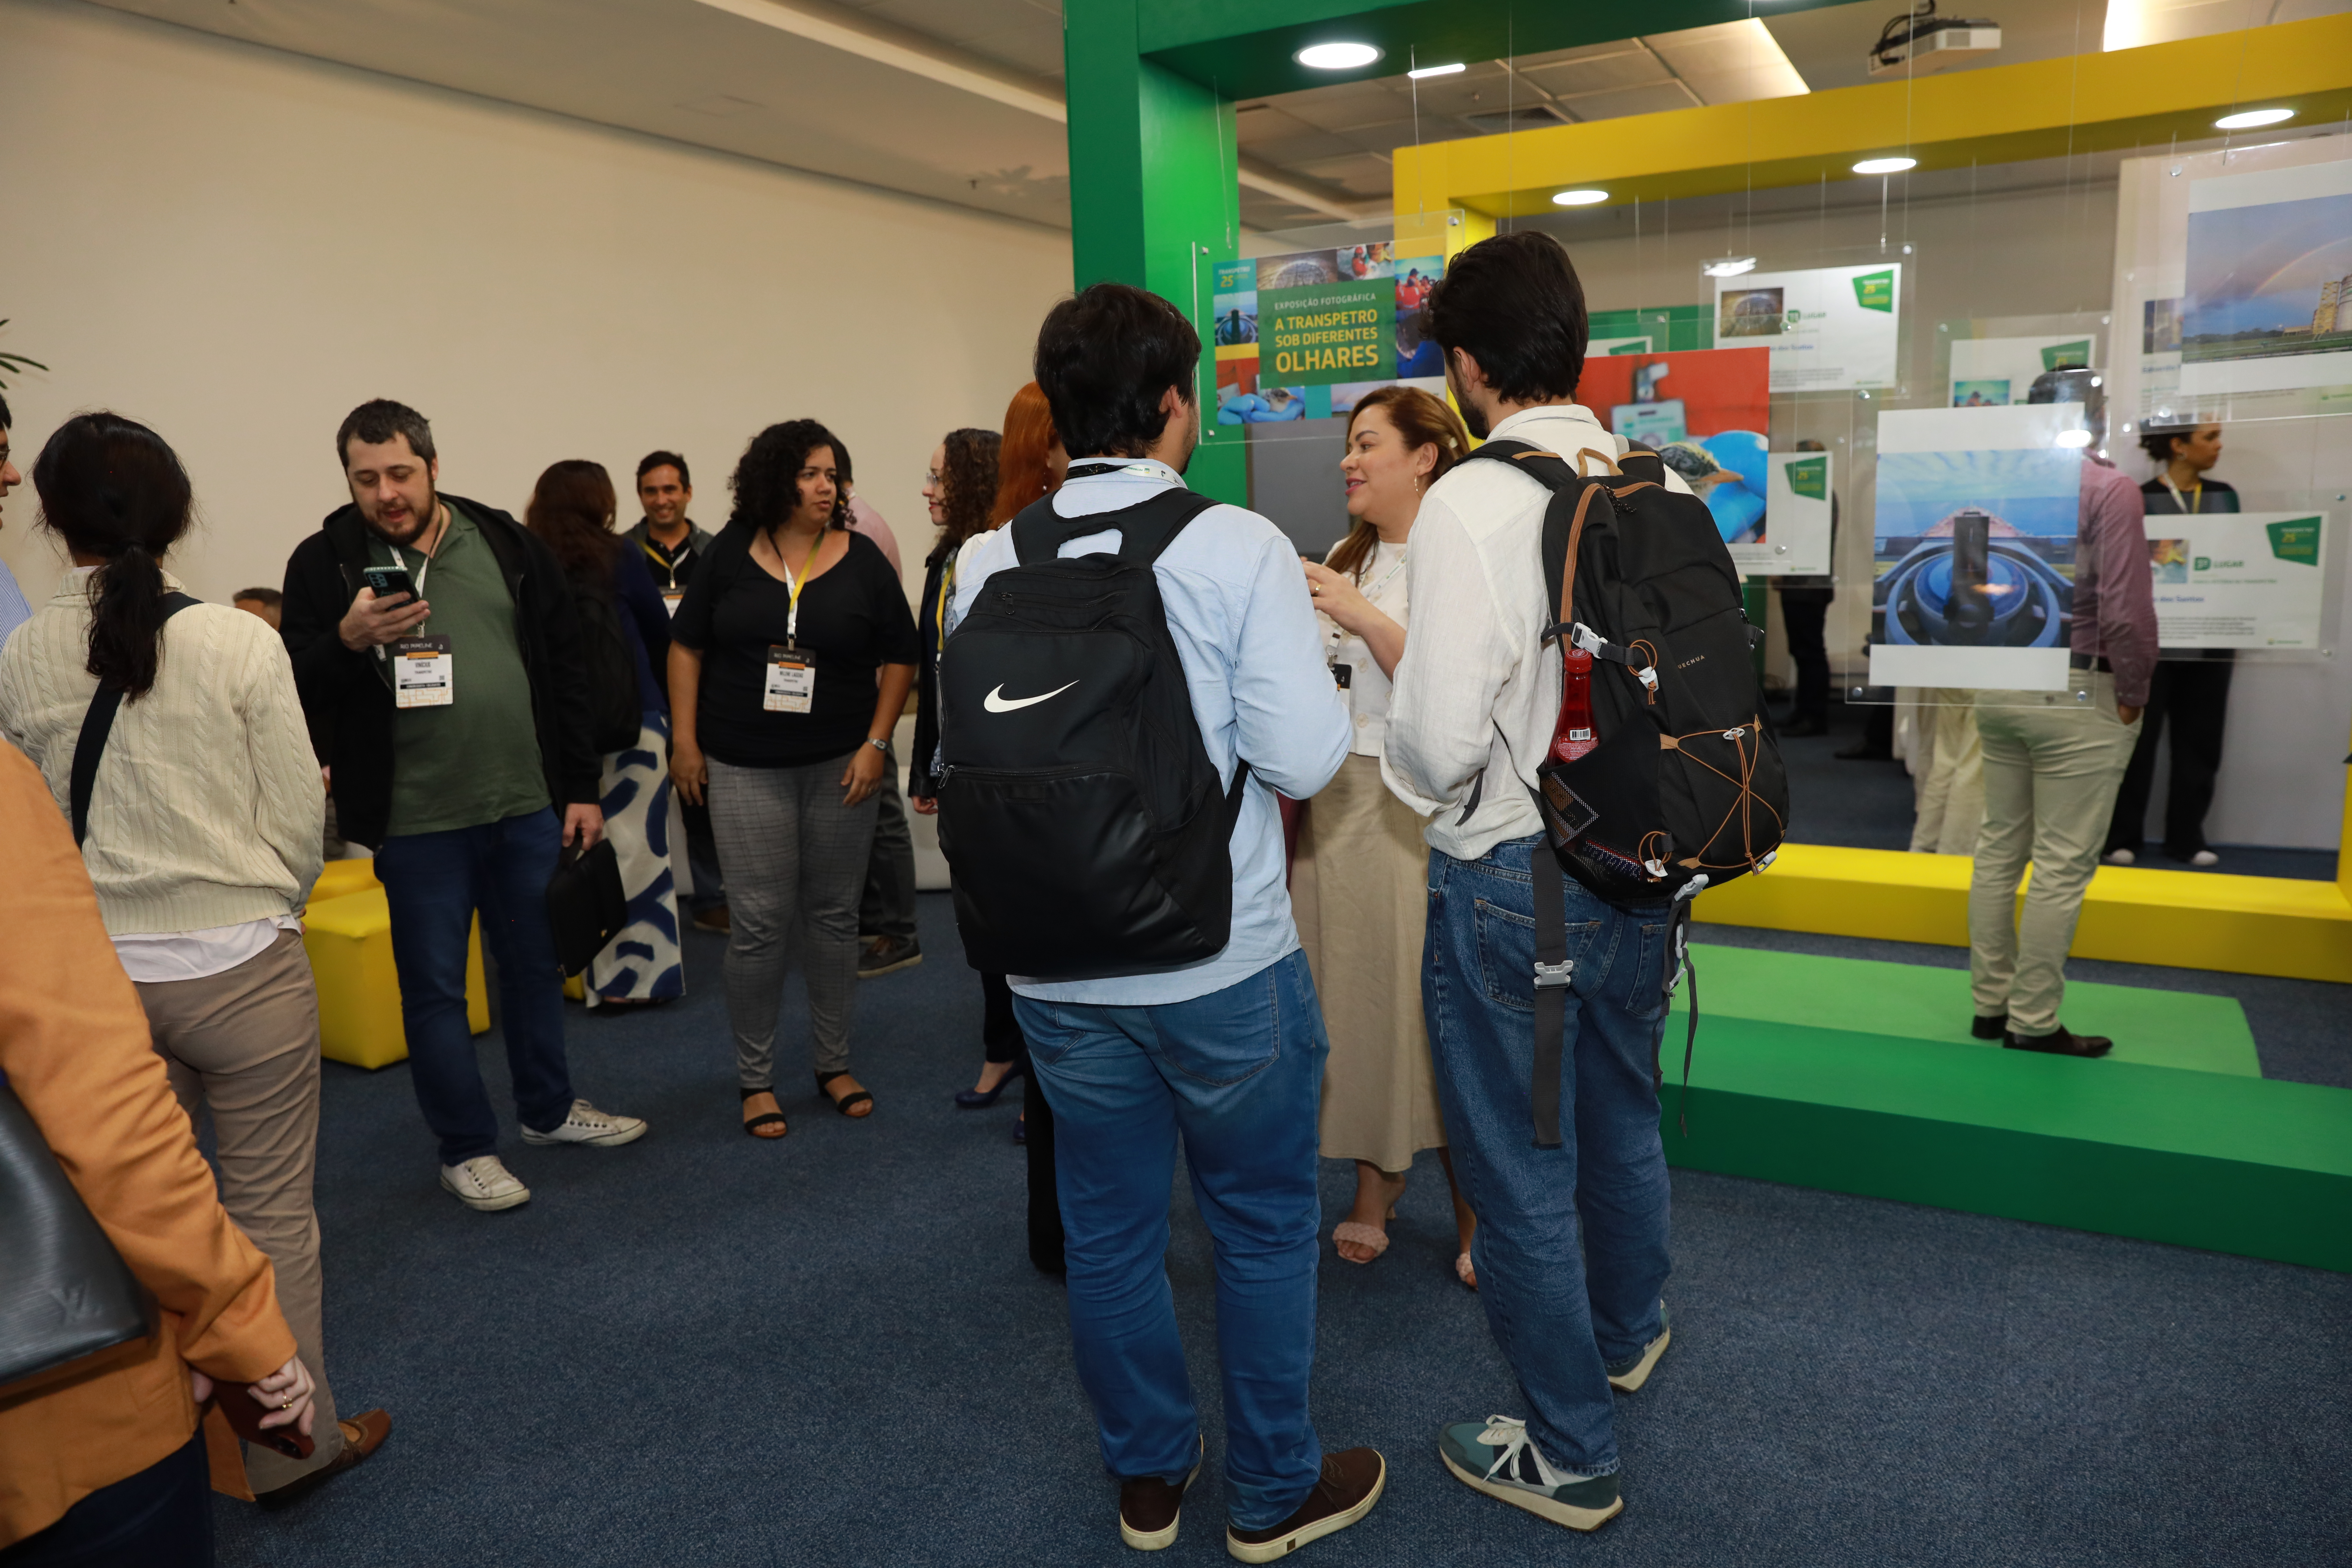 Rio Pipeline: business environment and technical content marked the event